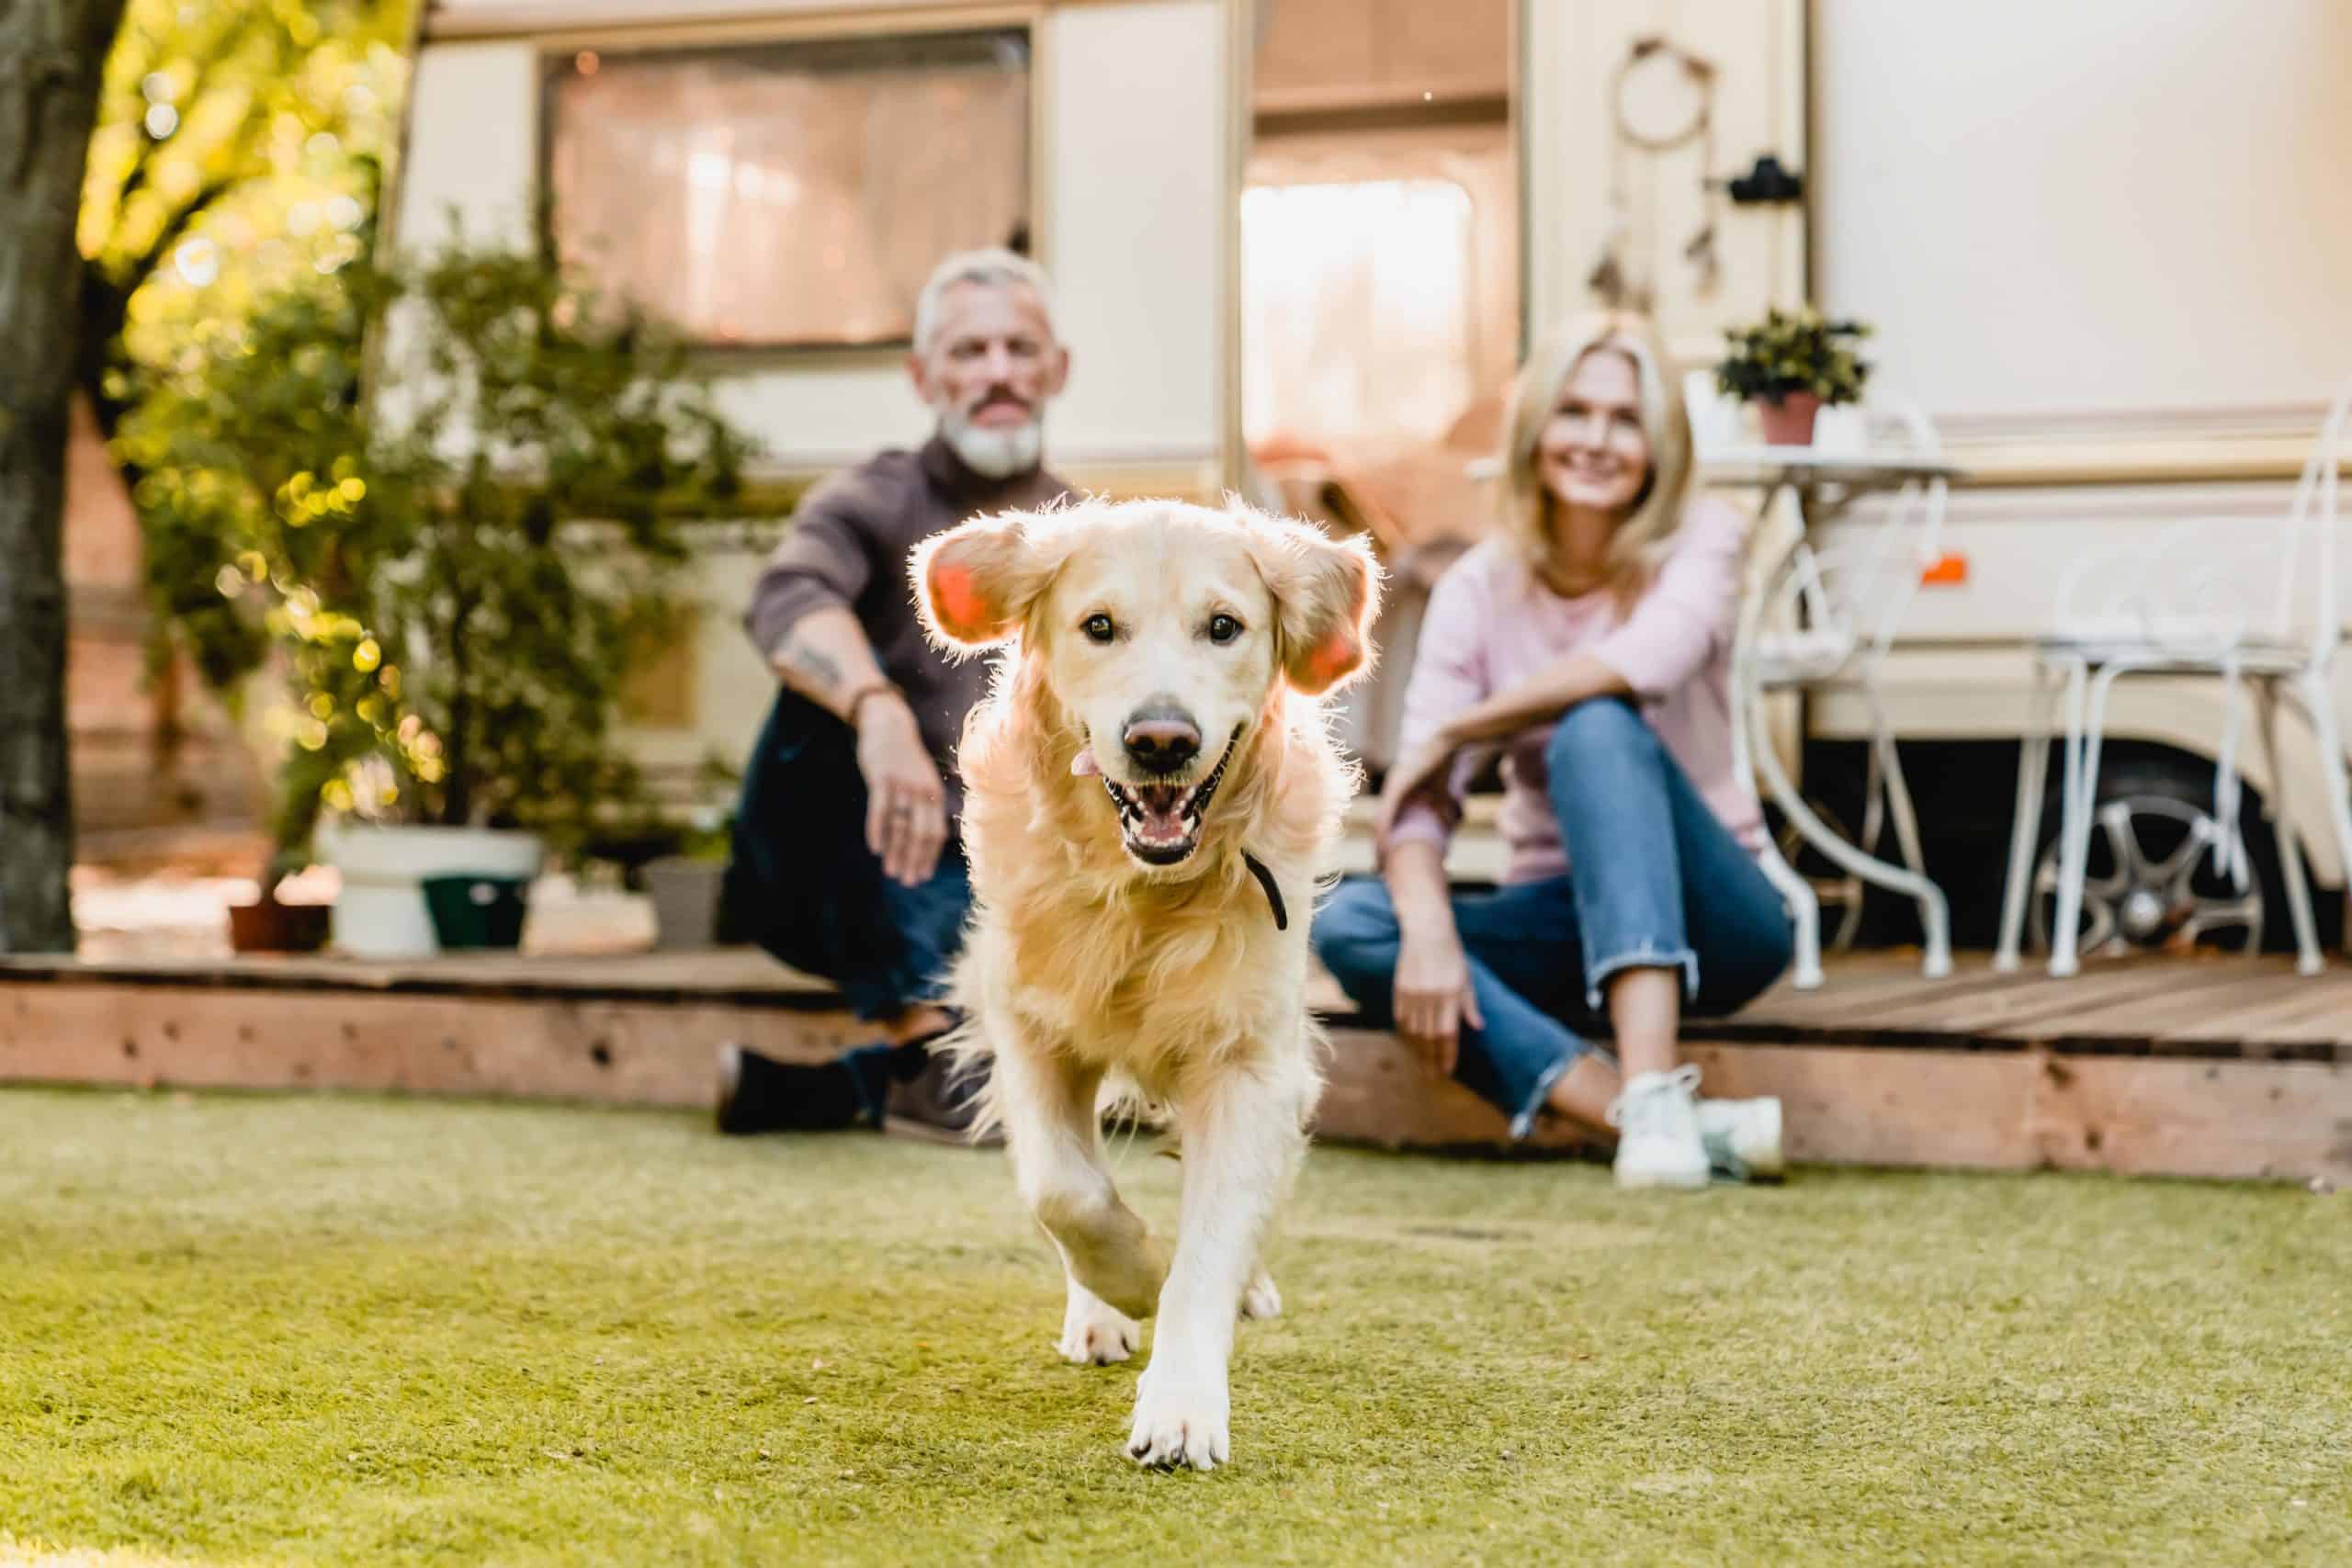 Happy golden retriever plays in back yard. Get creative with these tips to turn your yard into a puppy paradise that you and your canine pal will never want to leave.